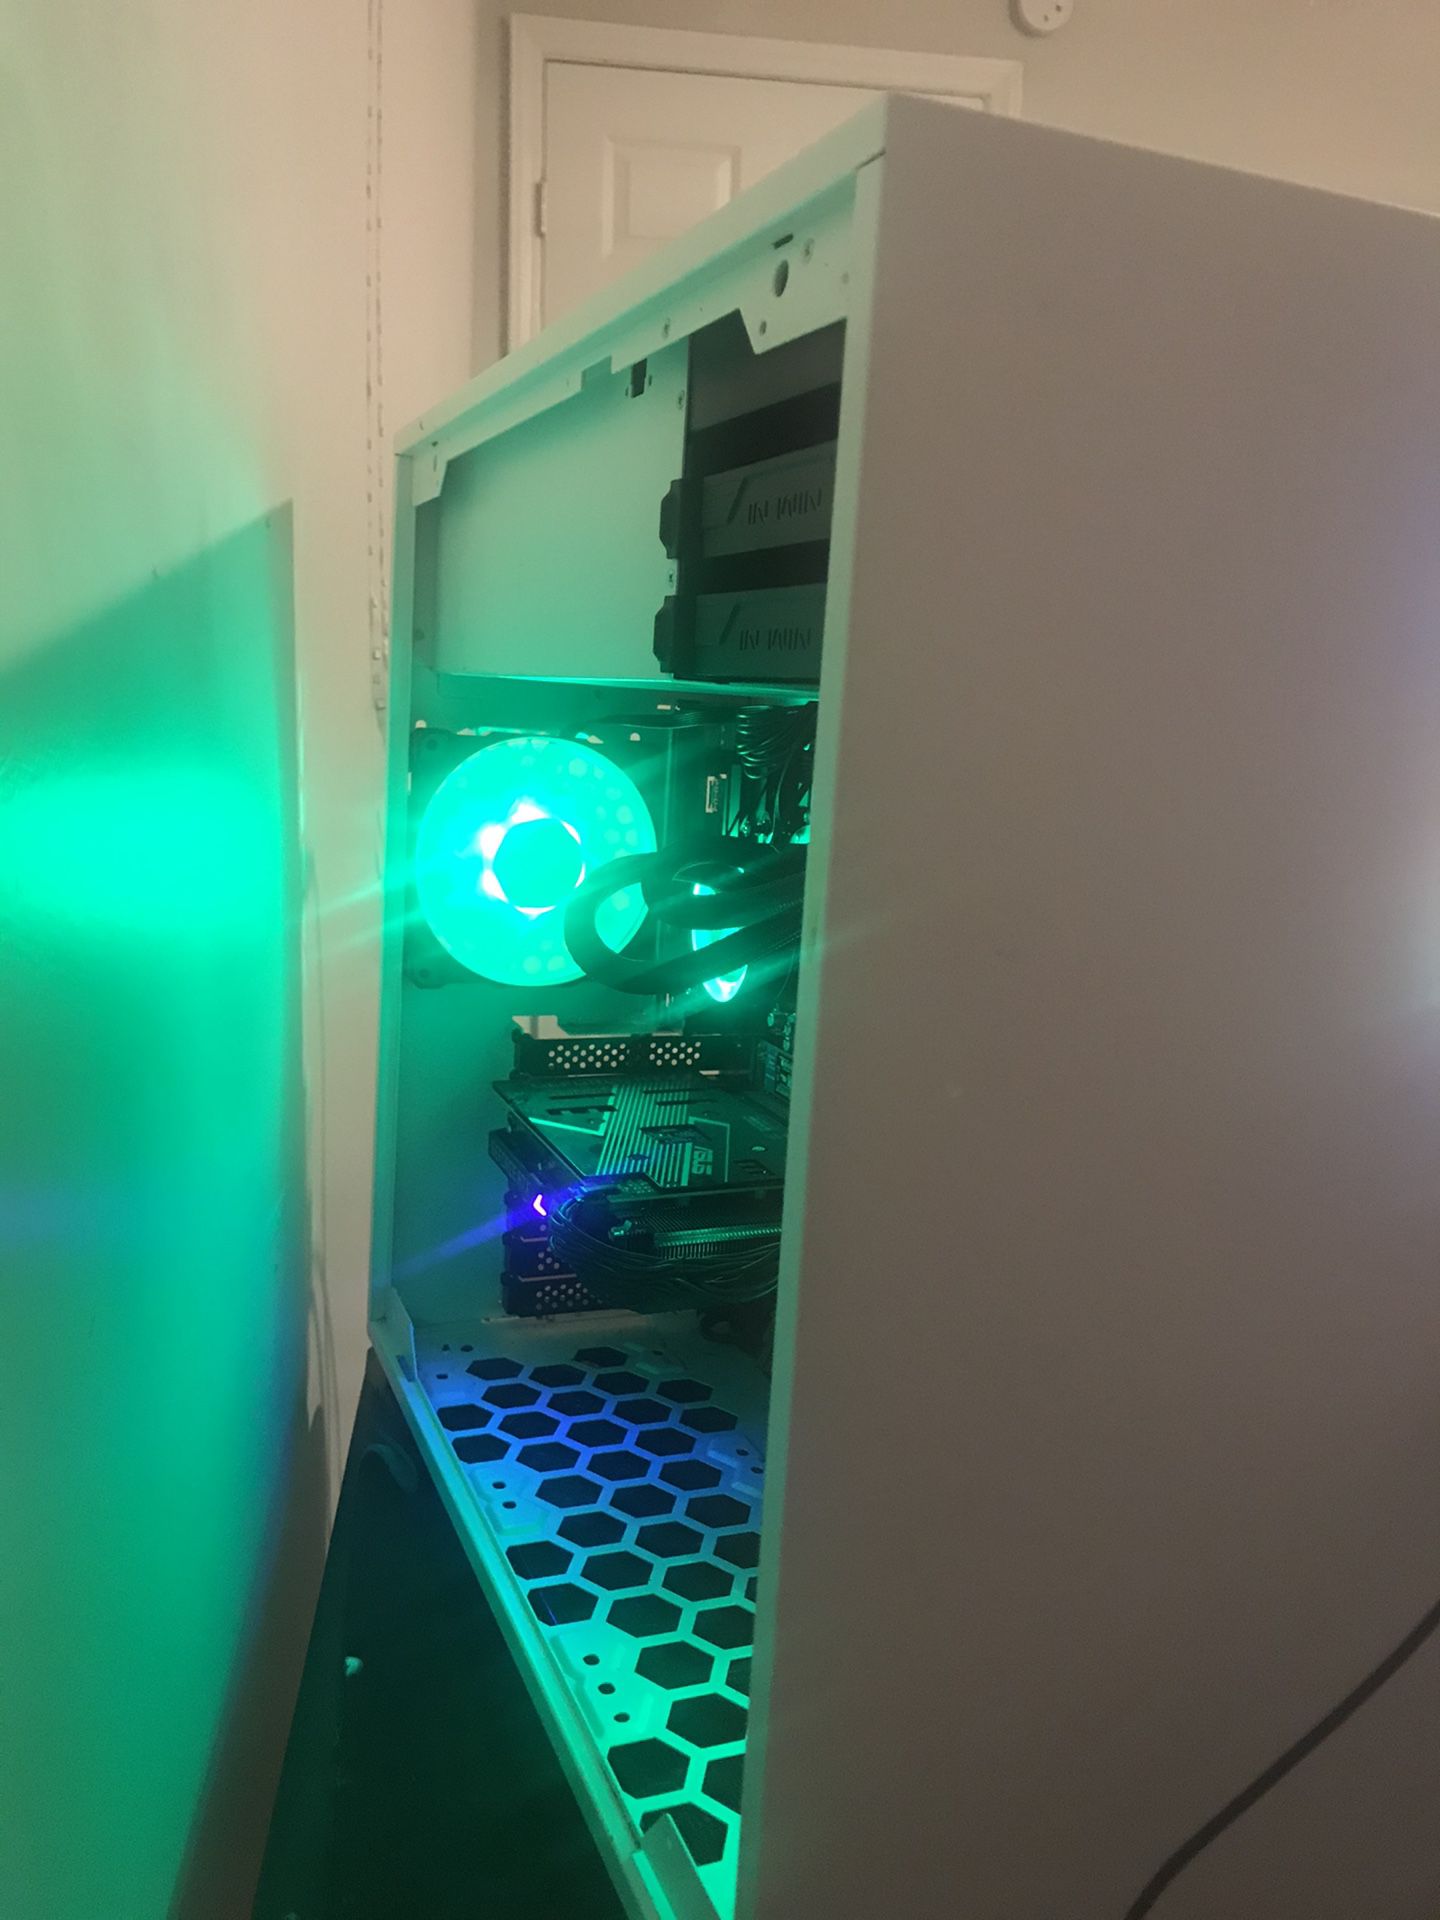 Skytech Gaming Shiva Gaming Desktop Intel Core i7-11700F 16GB Memory  NVIDIA GeForce RTX 3060 12G 1TB SSD 240mm AIO White for Sale in  Woodstock, GA OfferUp